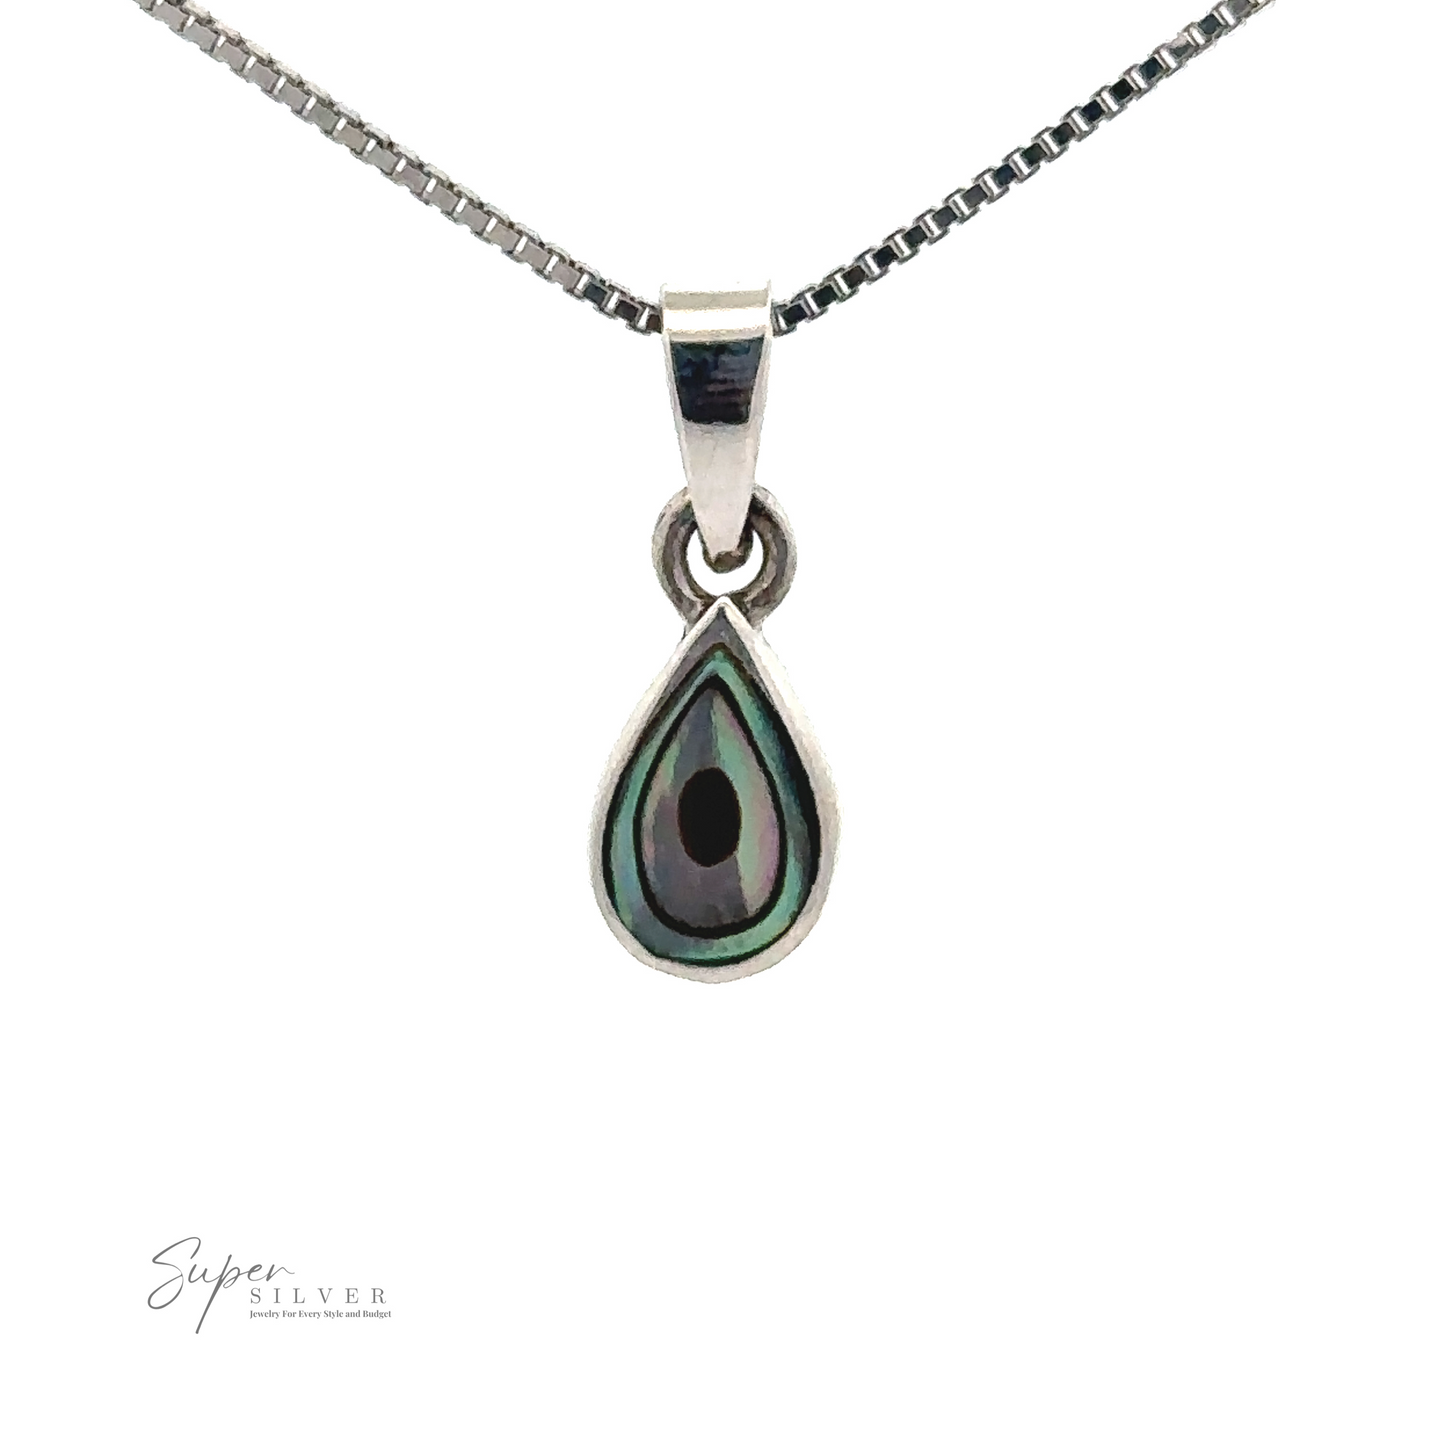 
                  
                    A Tiny Inlay Teardrop Pendant with an iridescent design hangs from a silver chain necklace. The sterling silver pendant features shades of green and black. Logo text "Super Silver" is visible in the lower-left corner.
                  
                